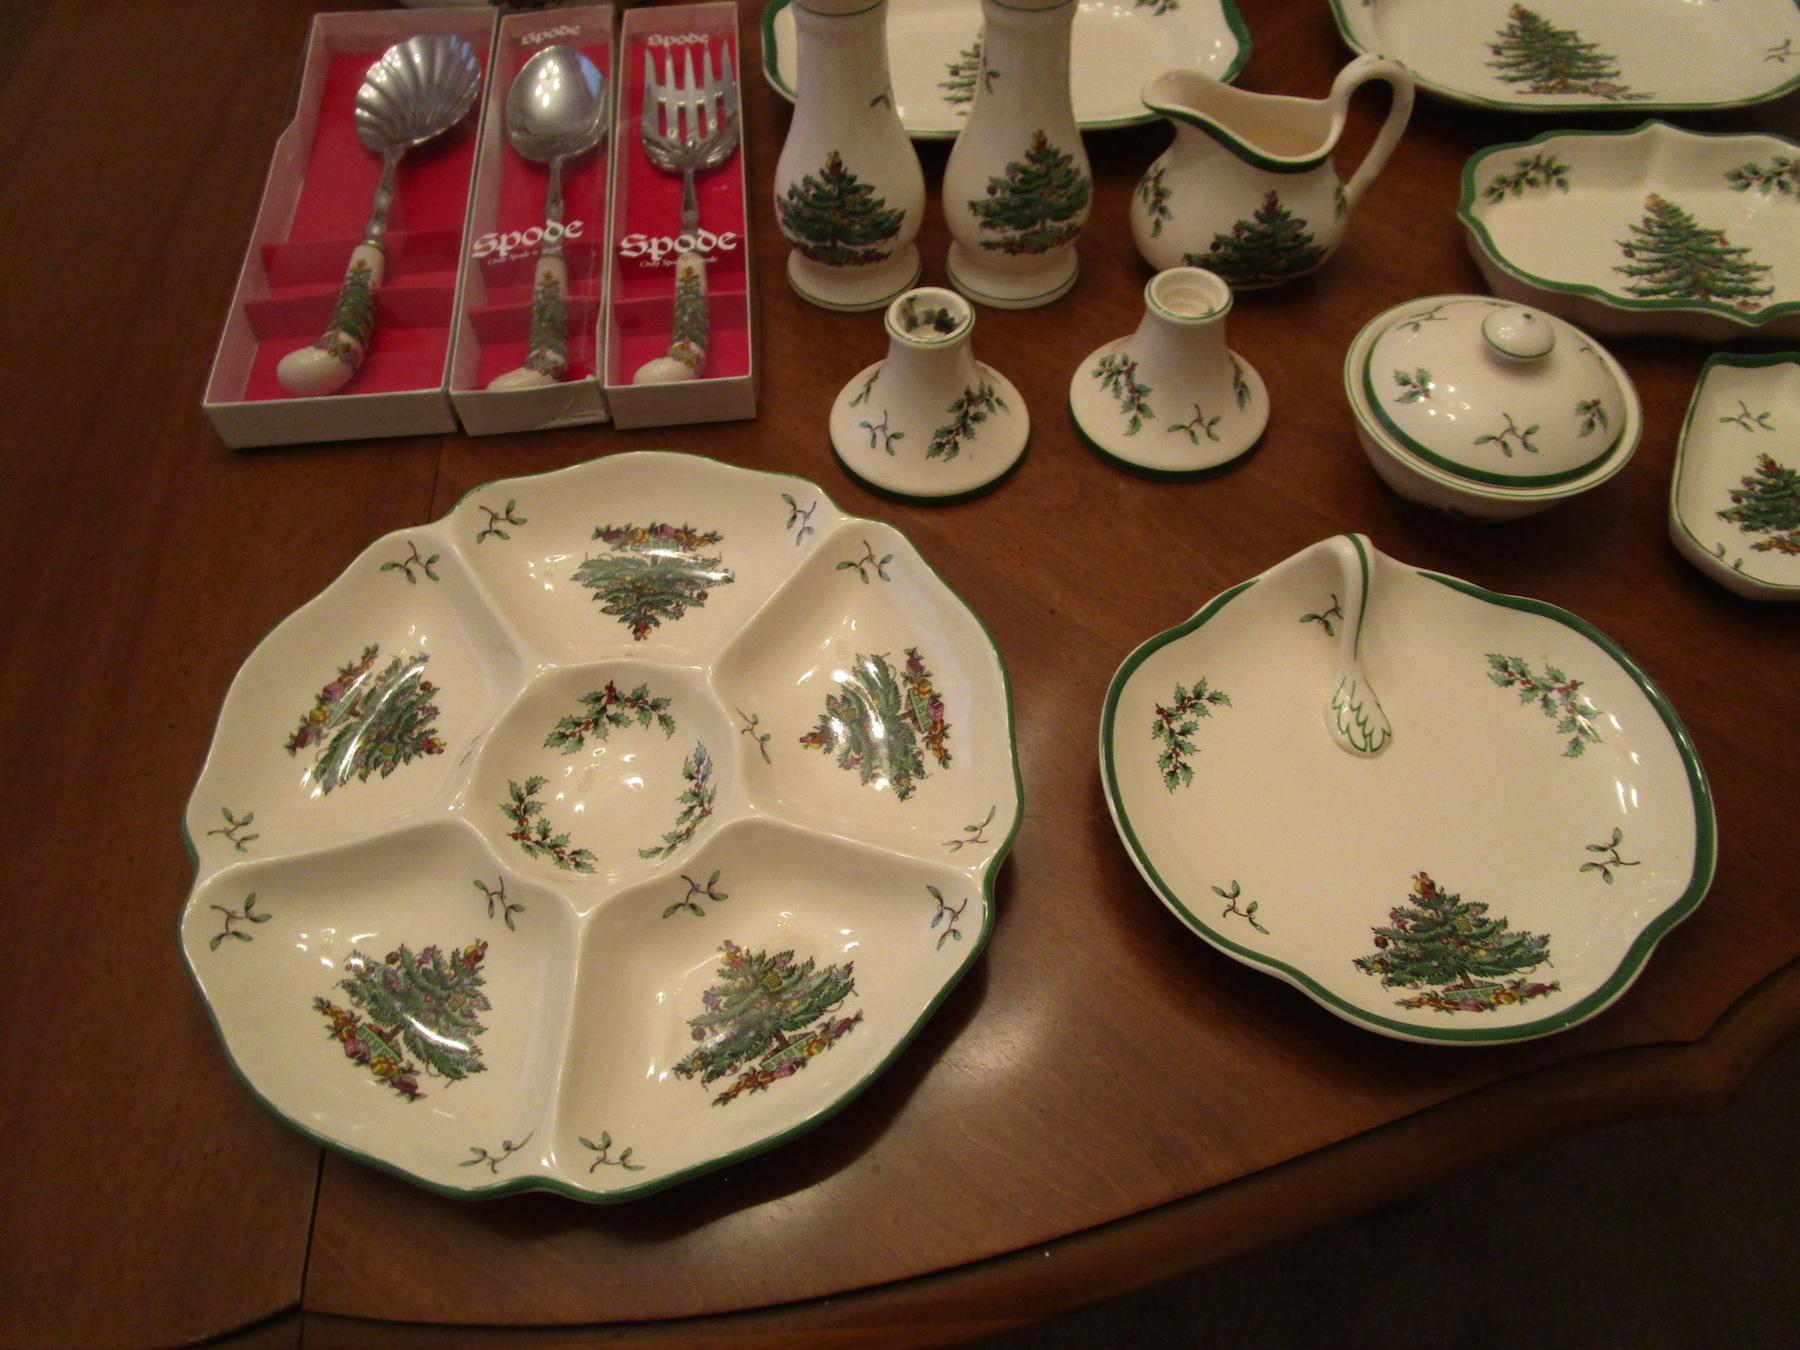 Lot of Spode Christmas Tree Serving Pieces